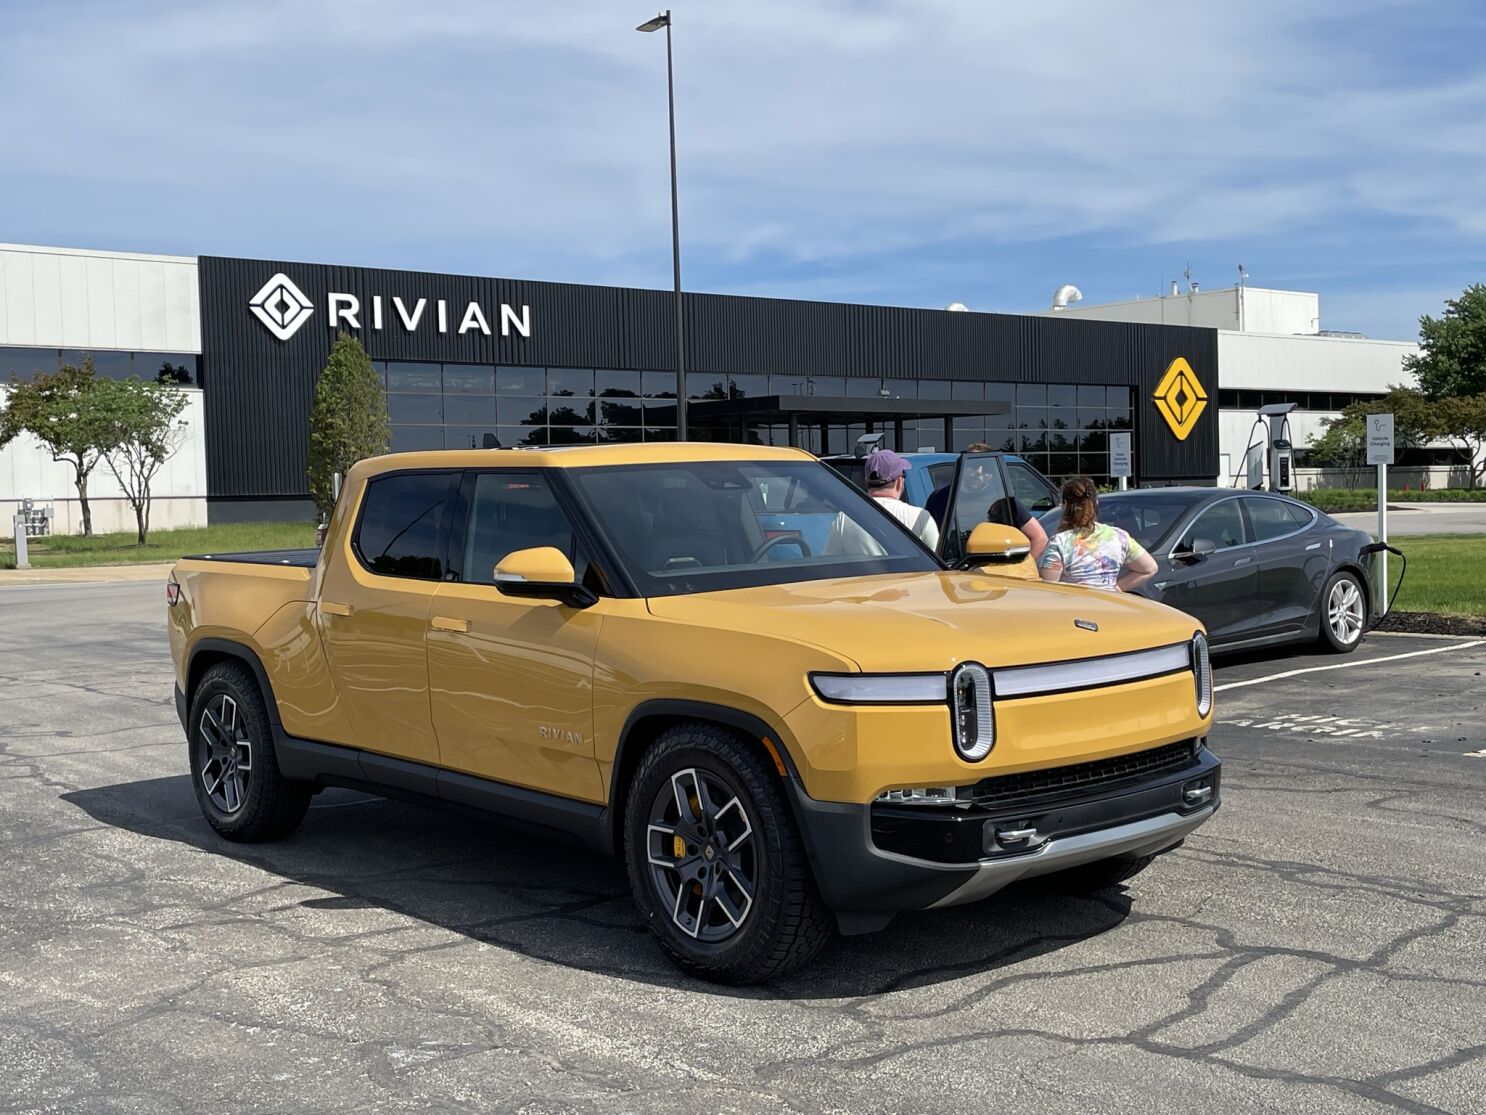 Connect with Other Rivian Owners - Enjoy the Camaraderie & Understanding of Being a Rivian Owner